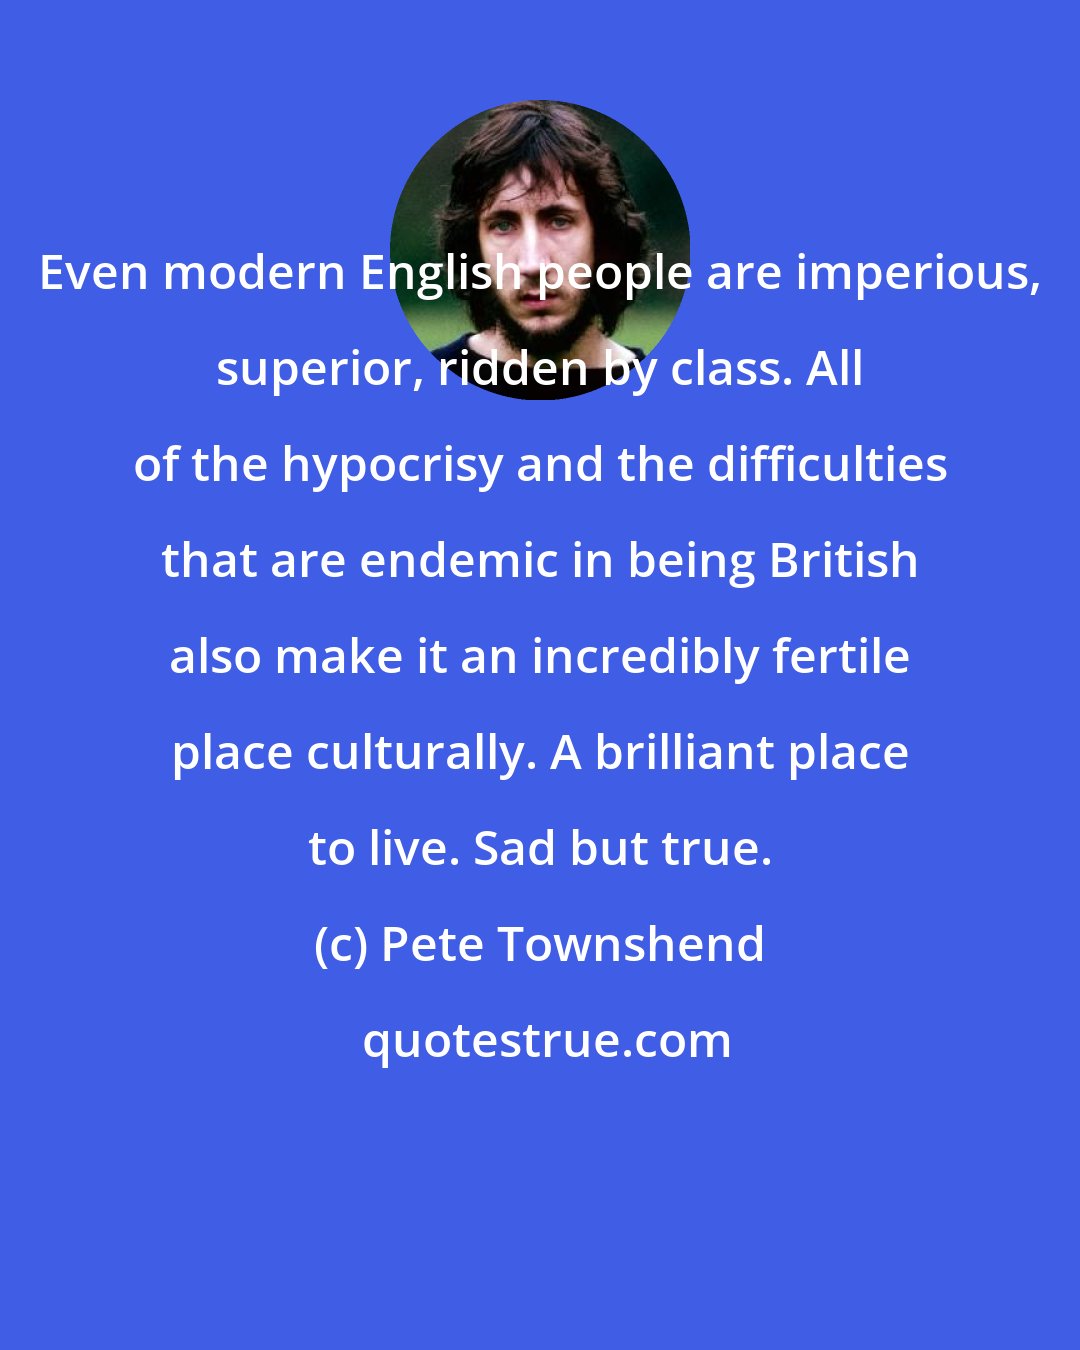 Pete Townshend: Even modern English people are imperious, superior, ridden by class. All of the hypocrisy and the difficulties that are endemic in being British also make it an incredibly fertile place culturally. A brilliant place to live. Sad but true.